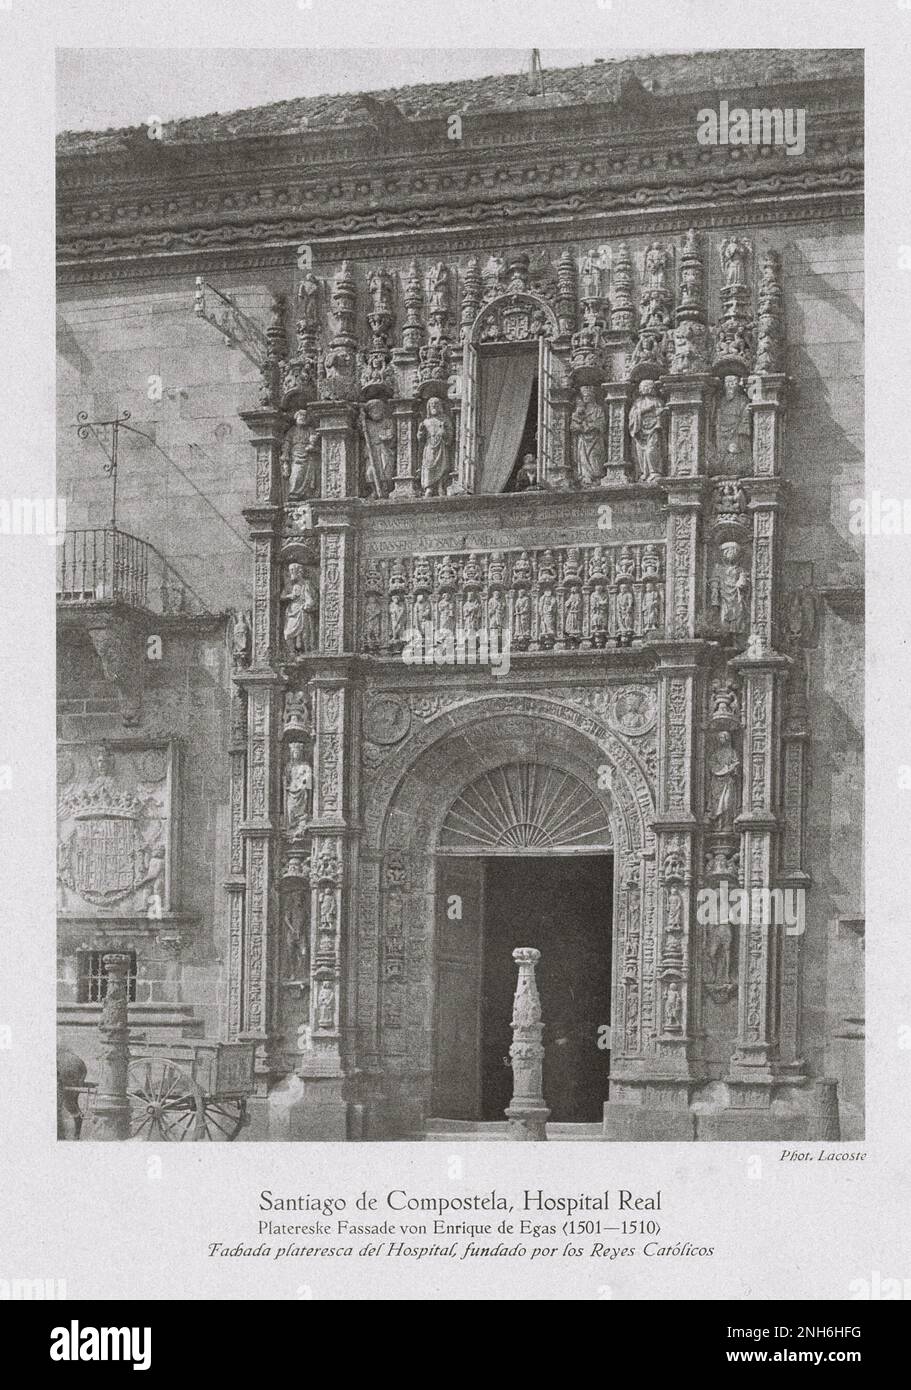 Architecture of Old Spain. Vintage photo of Hostal dos Reis Católicos (Hospital Real) in Santiago de Compostela. Galicia, Spain. The Hostal dos Reis Católicos (in Galician), also called the Hostal de Los Reyes Católicos (in Spanish) or Parador de Santiago de Compostela, is a five-star Parador hotel, located in the Praza do Obradoiro of Santiago de Compostela, Spain. It is widely considered one of the oldest continuously operating hotel in the world, and has also been called the 'most beautiful hotel in Europe'. Stock Photo